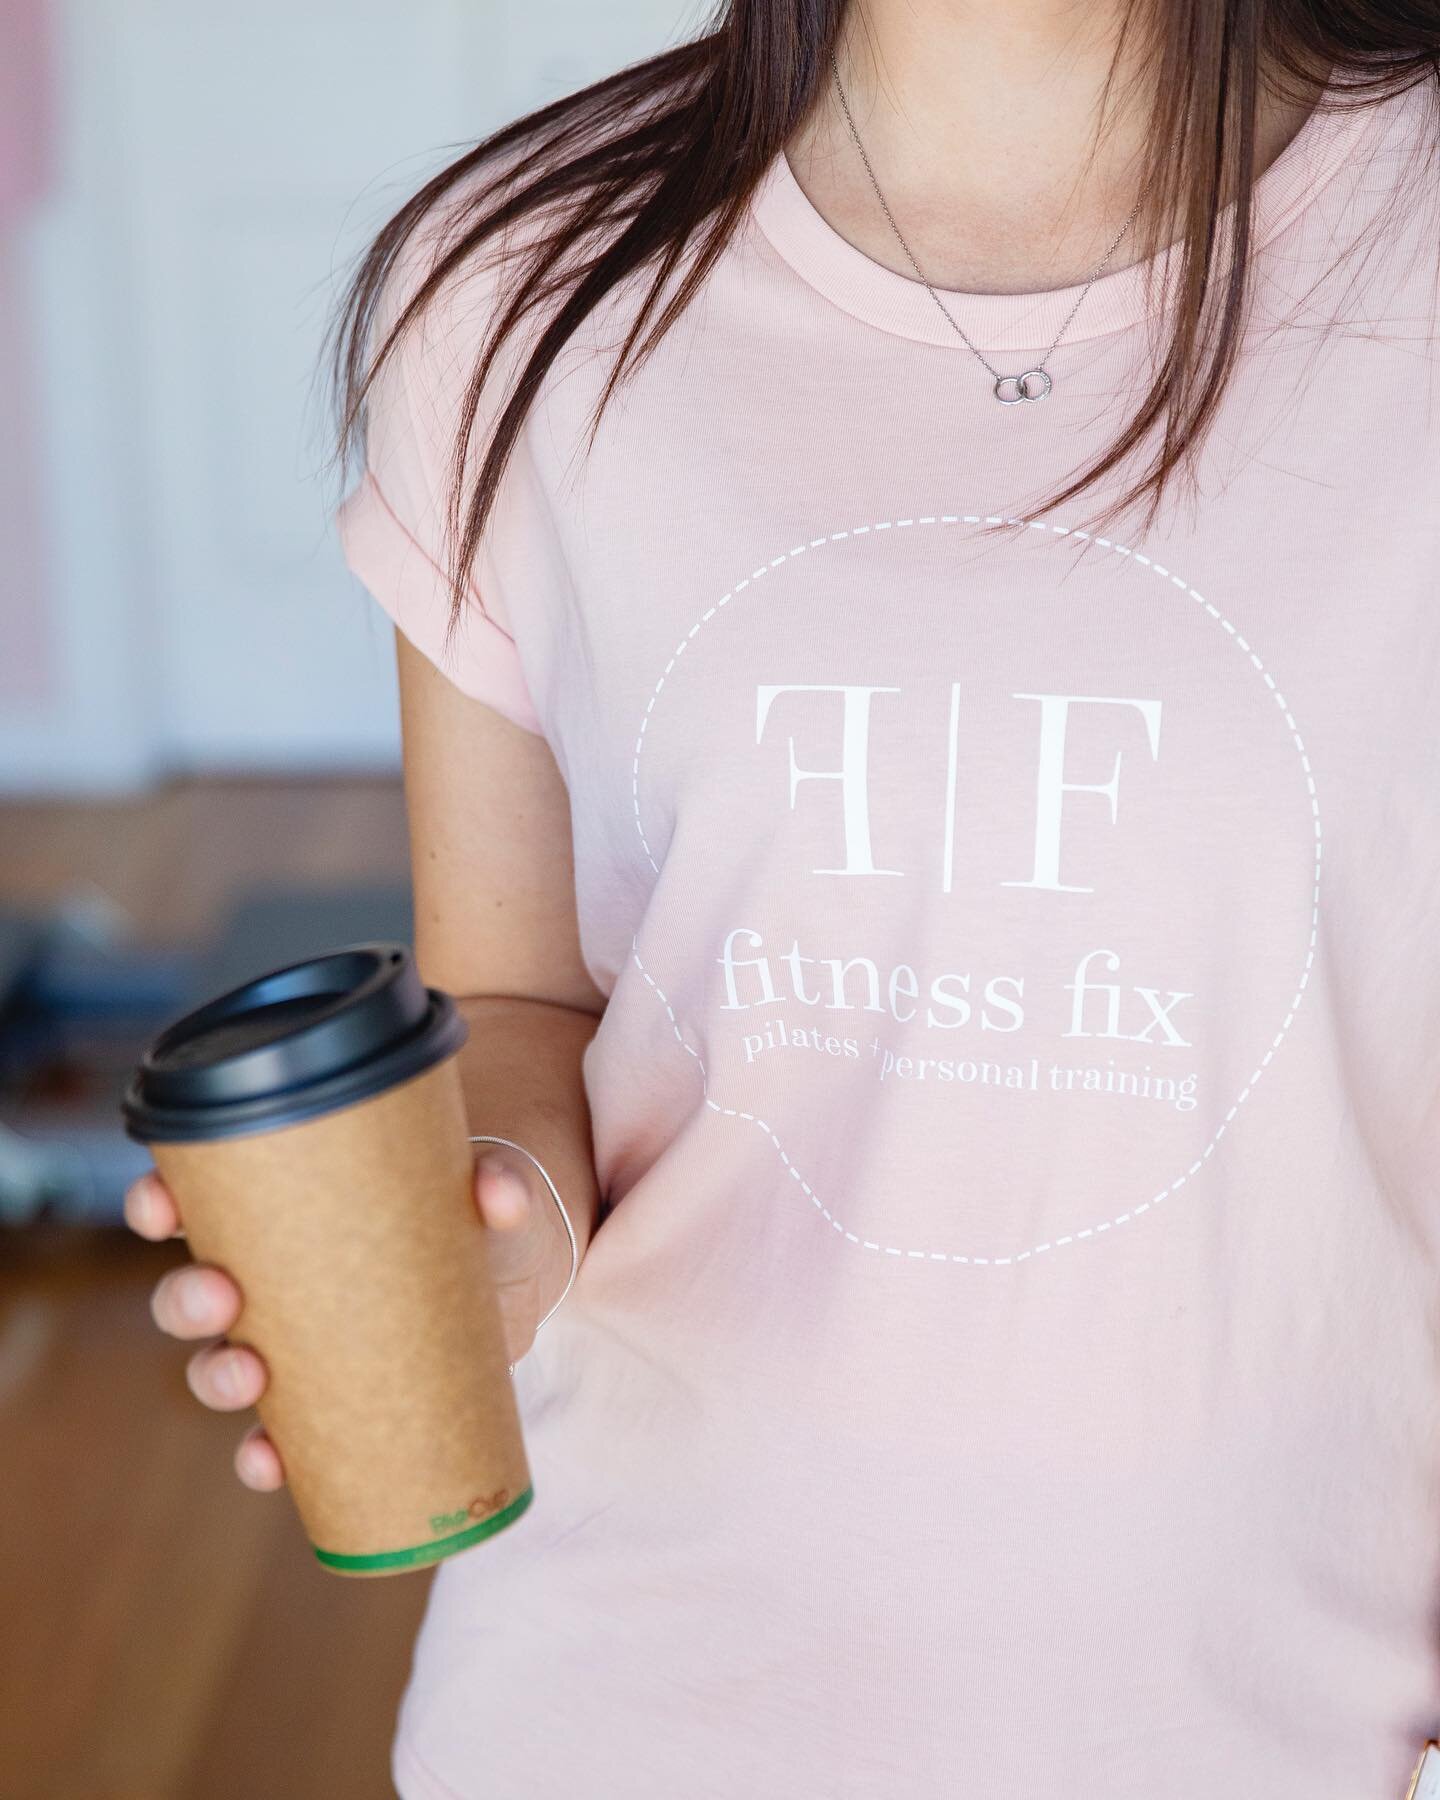 Pilates in Pink followed with a coffee AKA a match made in heaven 💫
2 more days until our Cancer Council Fundraiser event! 
We still have selected sizes in our FF pink shirts, raffle tickets on sale, a few last minute spots available &amp; donations